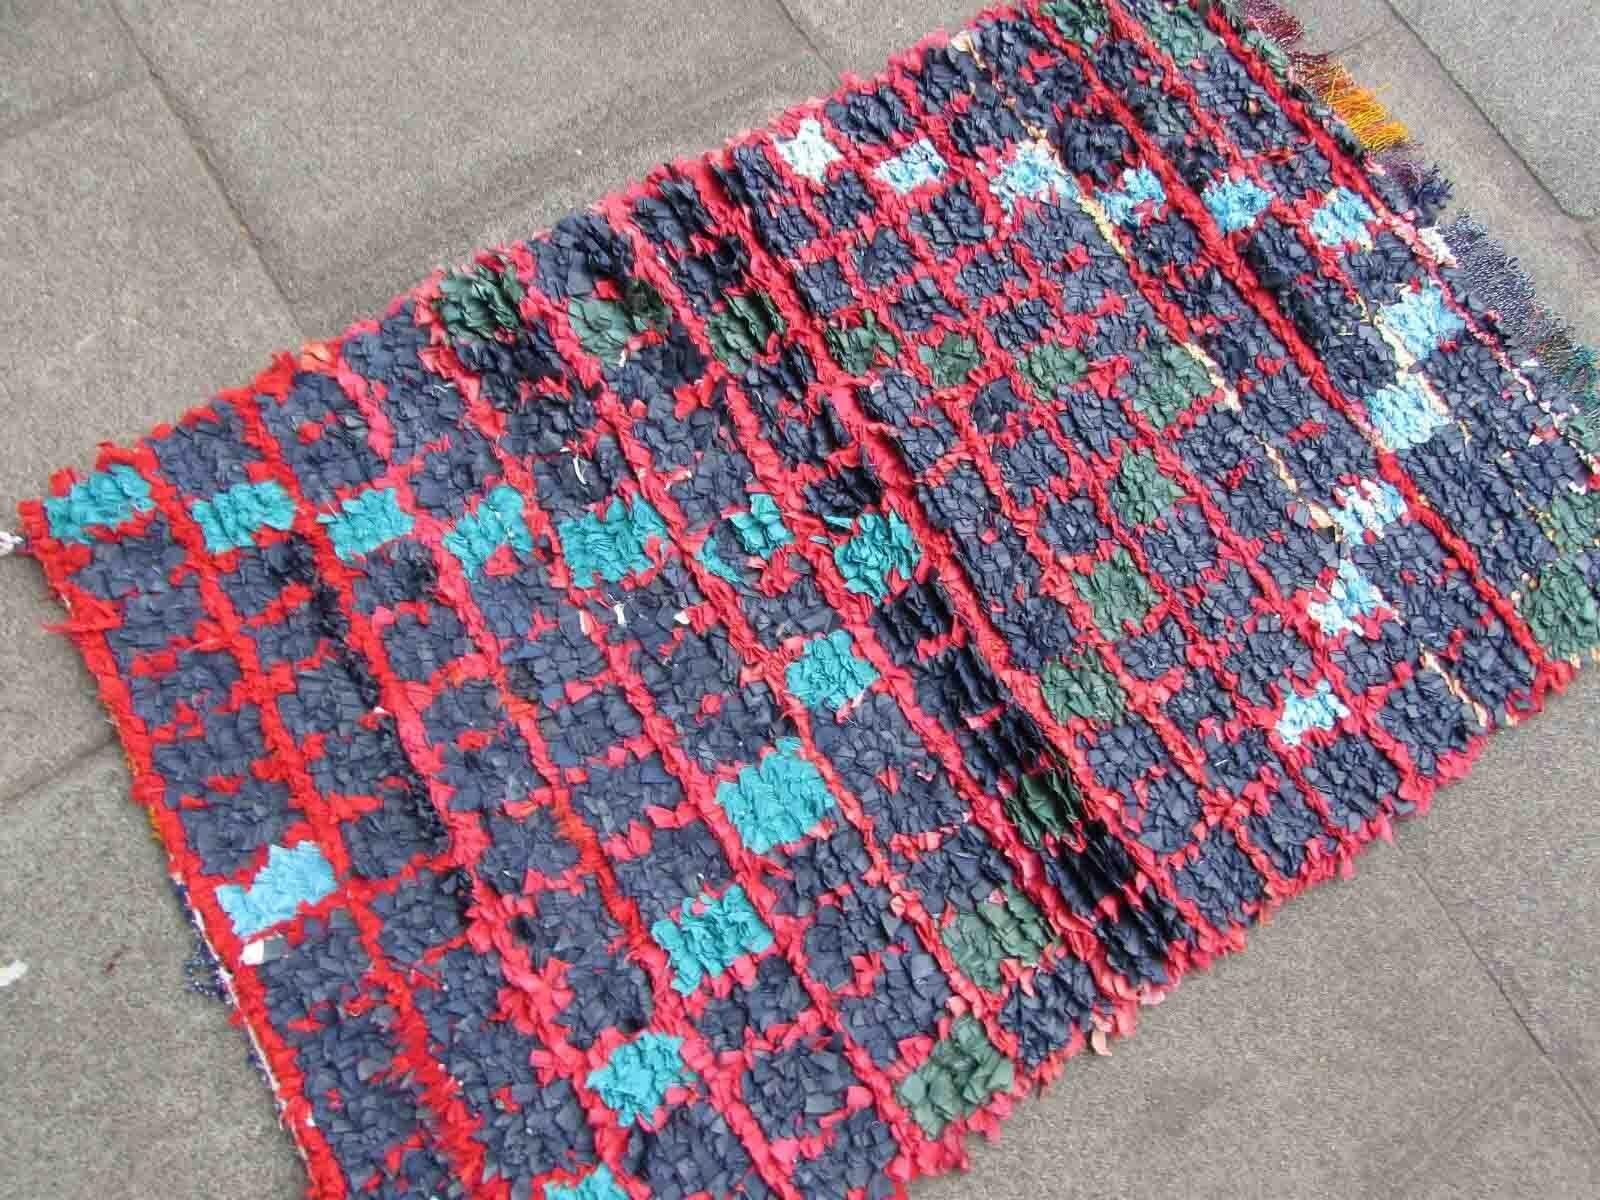 Handmade vintage Moroccan Boucherouite rug made in colorful cotton fabric. The rug is from the end of 20th century in original good condition.

-condition: original good, 

-circa: 1970s,

-size: 2.9' x 4.4' (89cm x 136cm),

-material: